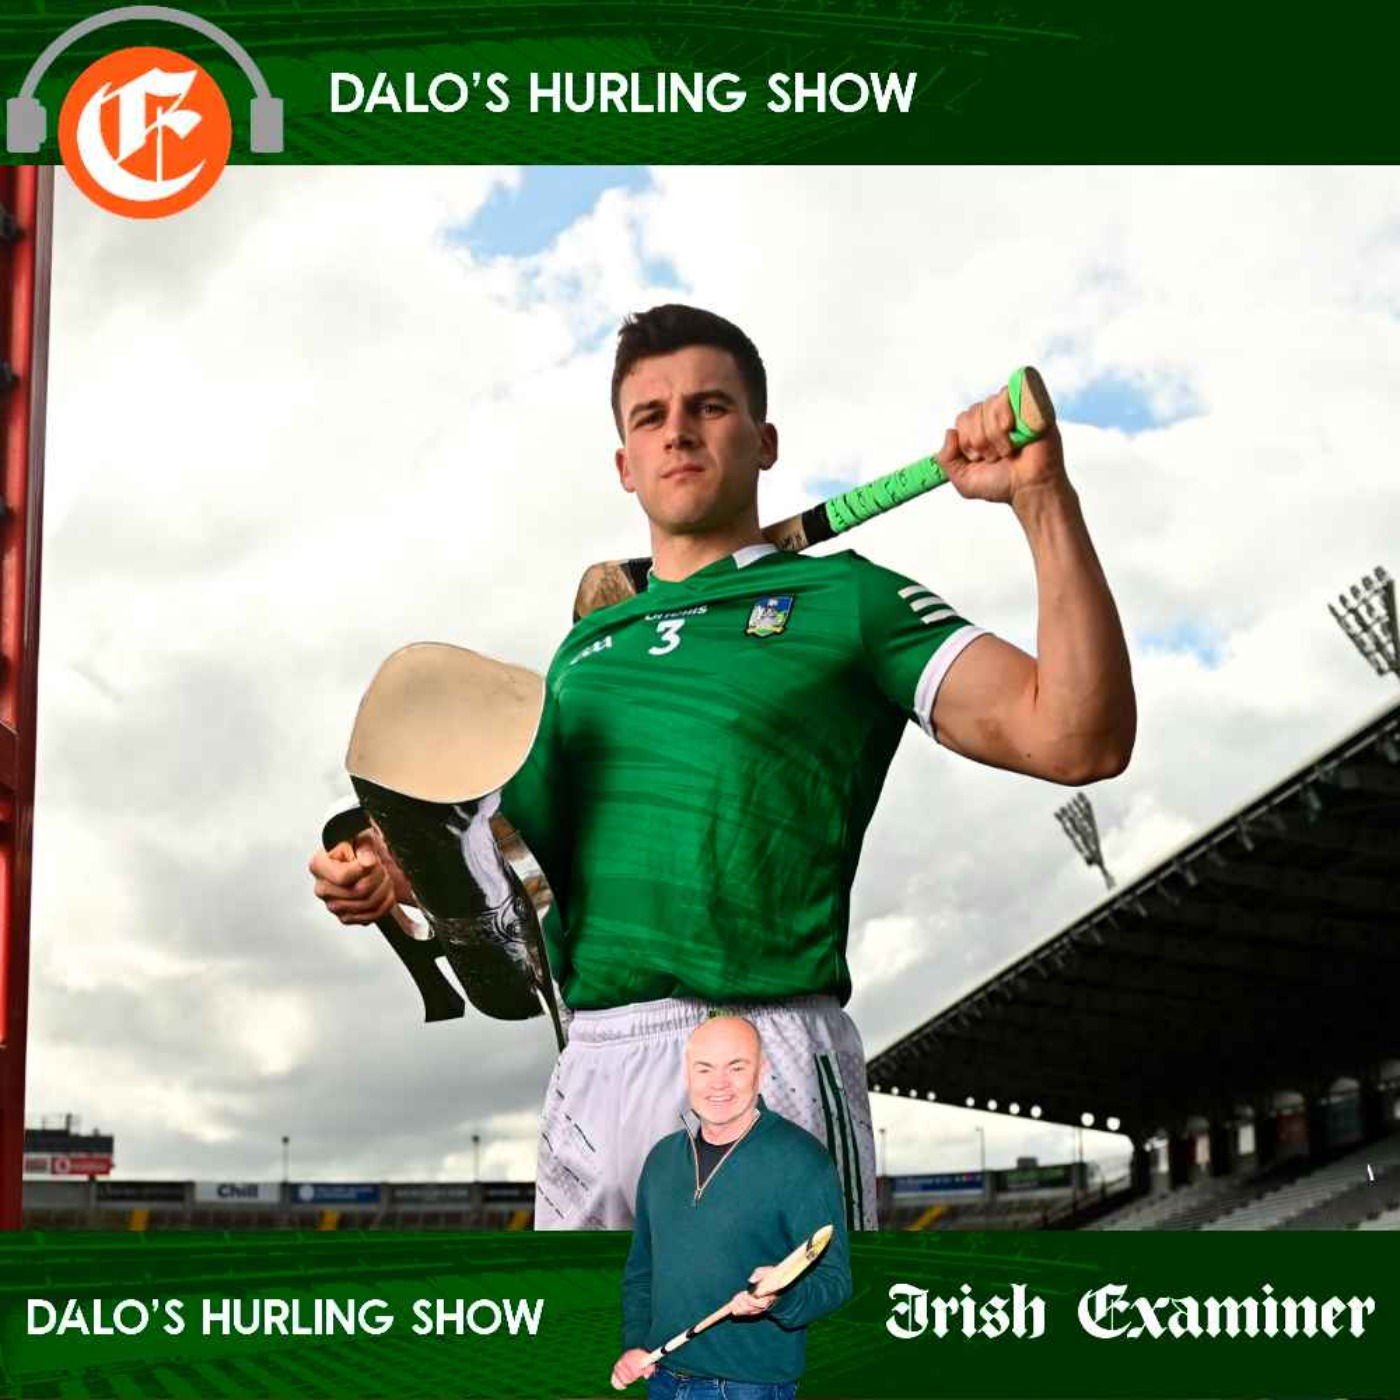 Dalo’s Hurling Championship Preview: Can continuity or curveballs take down the Untouchables?